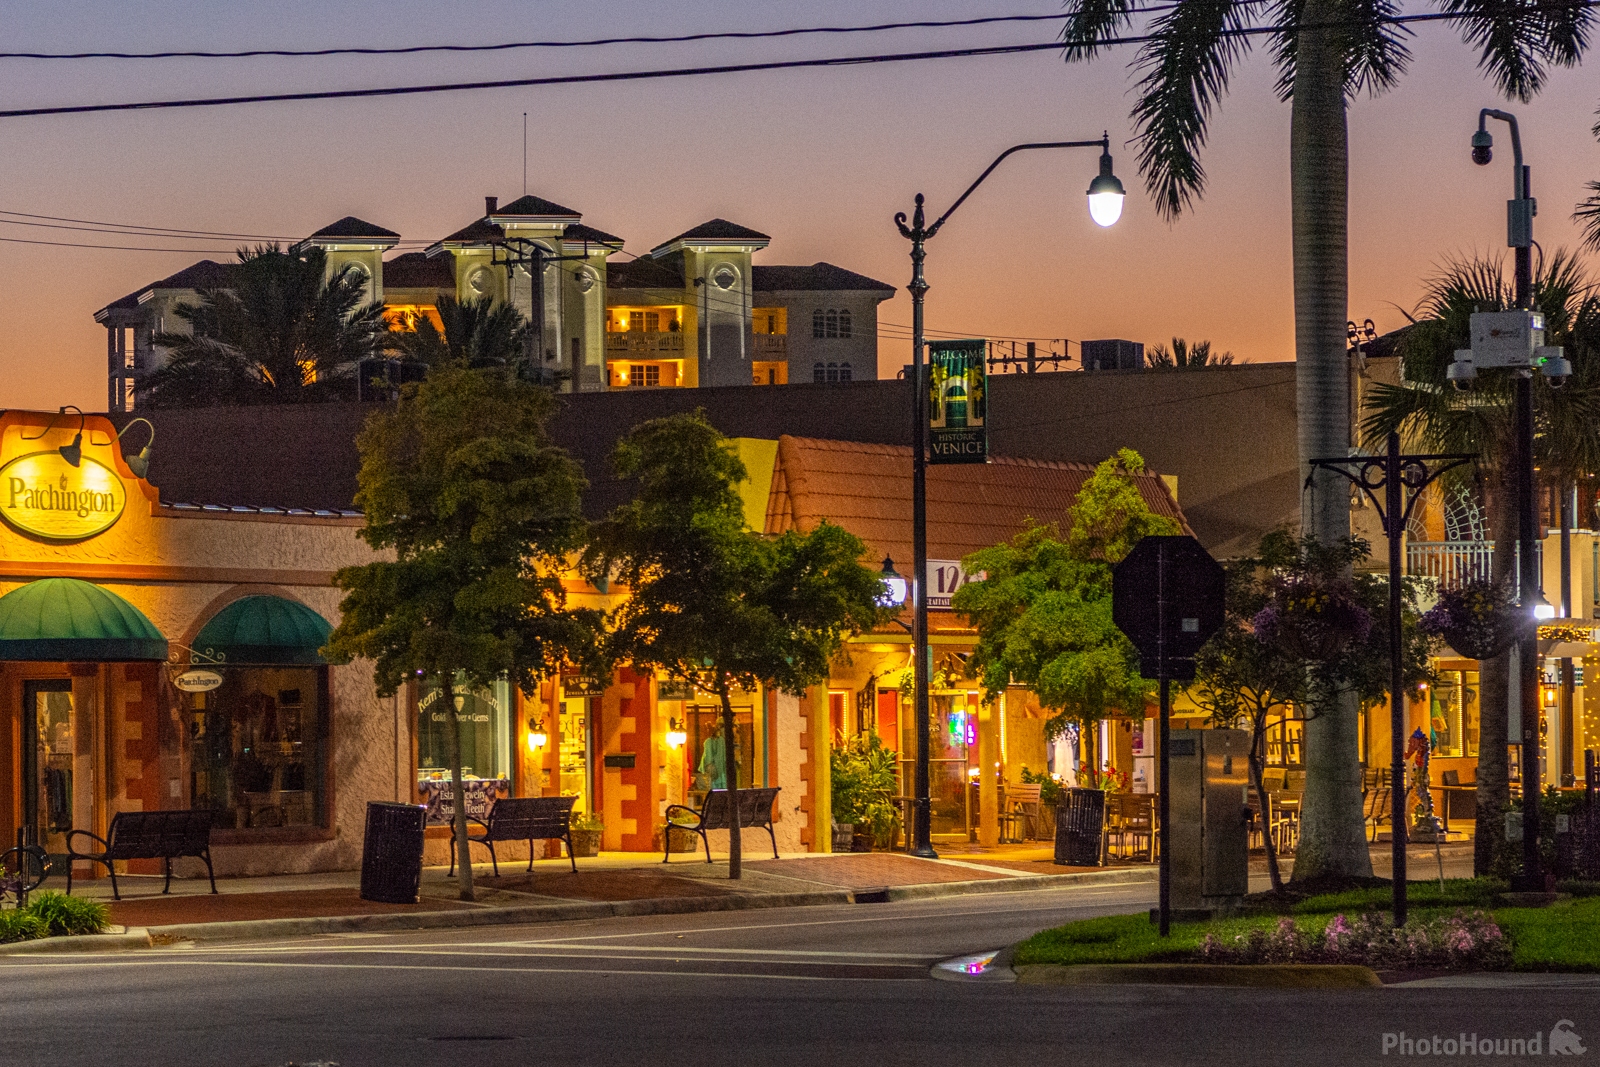 Image of West Venice Ave, Venice, Florida by Wayne Foote